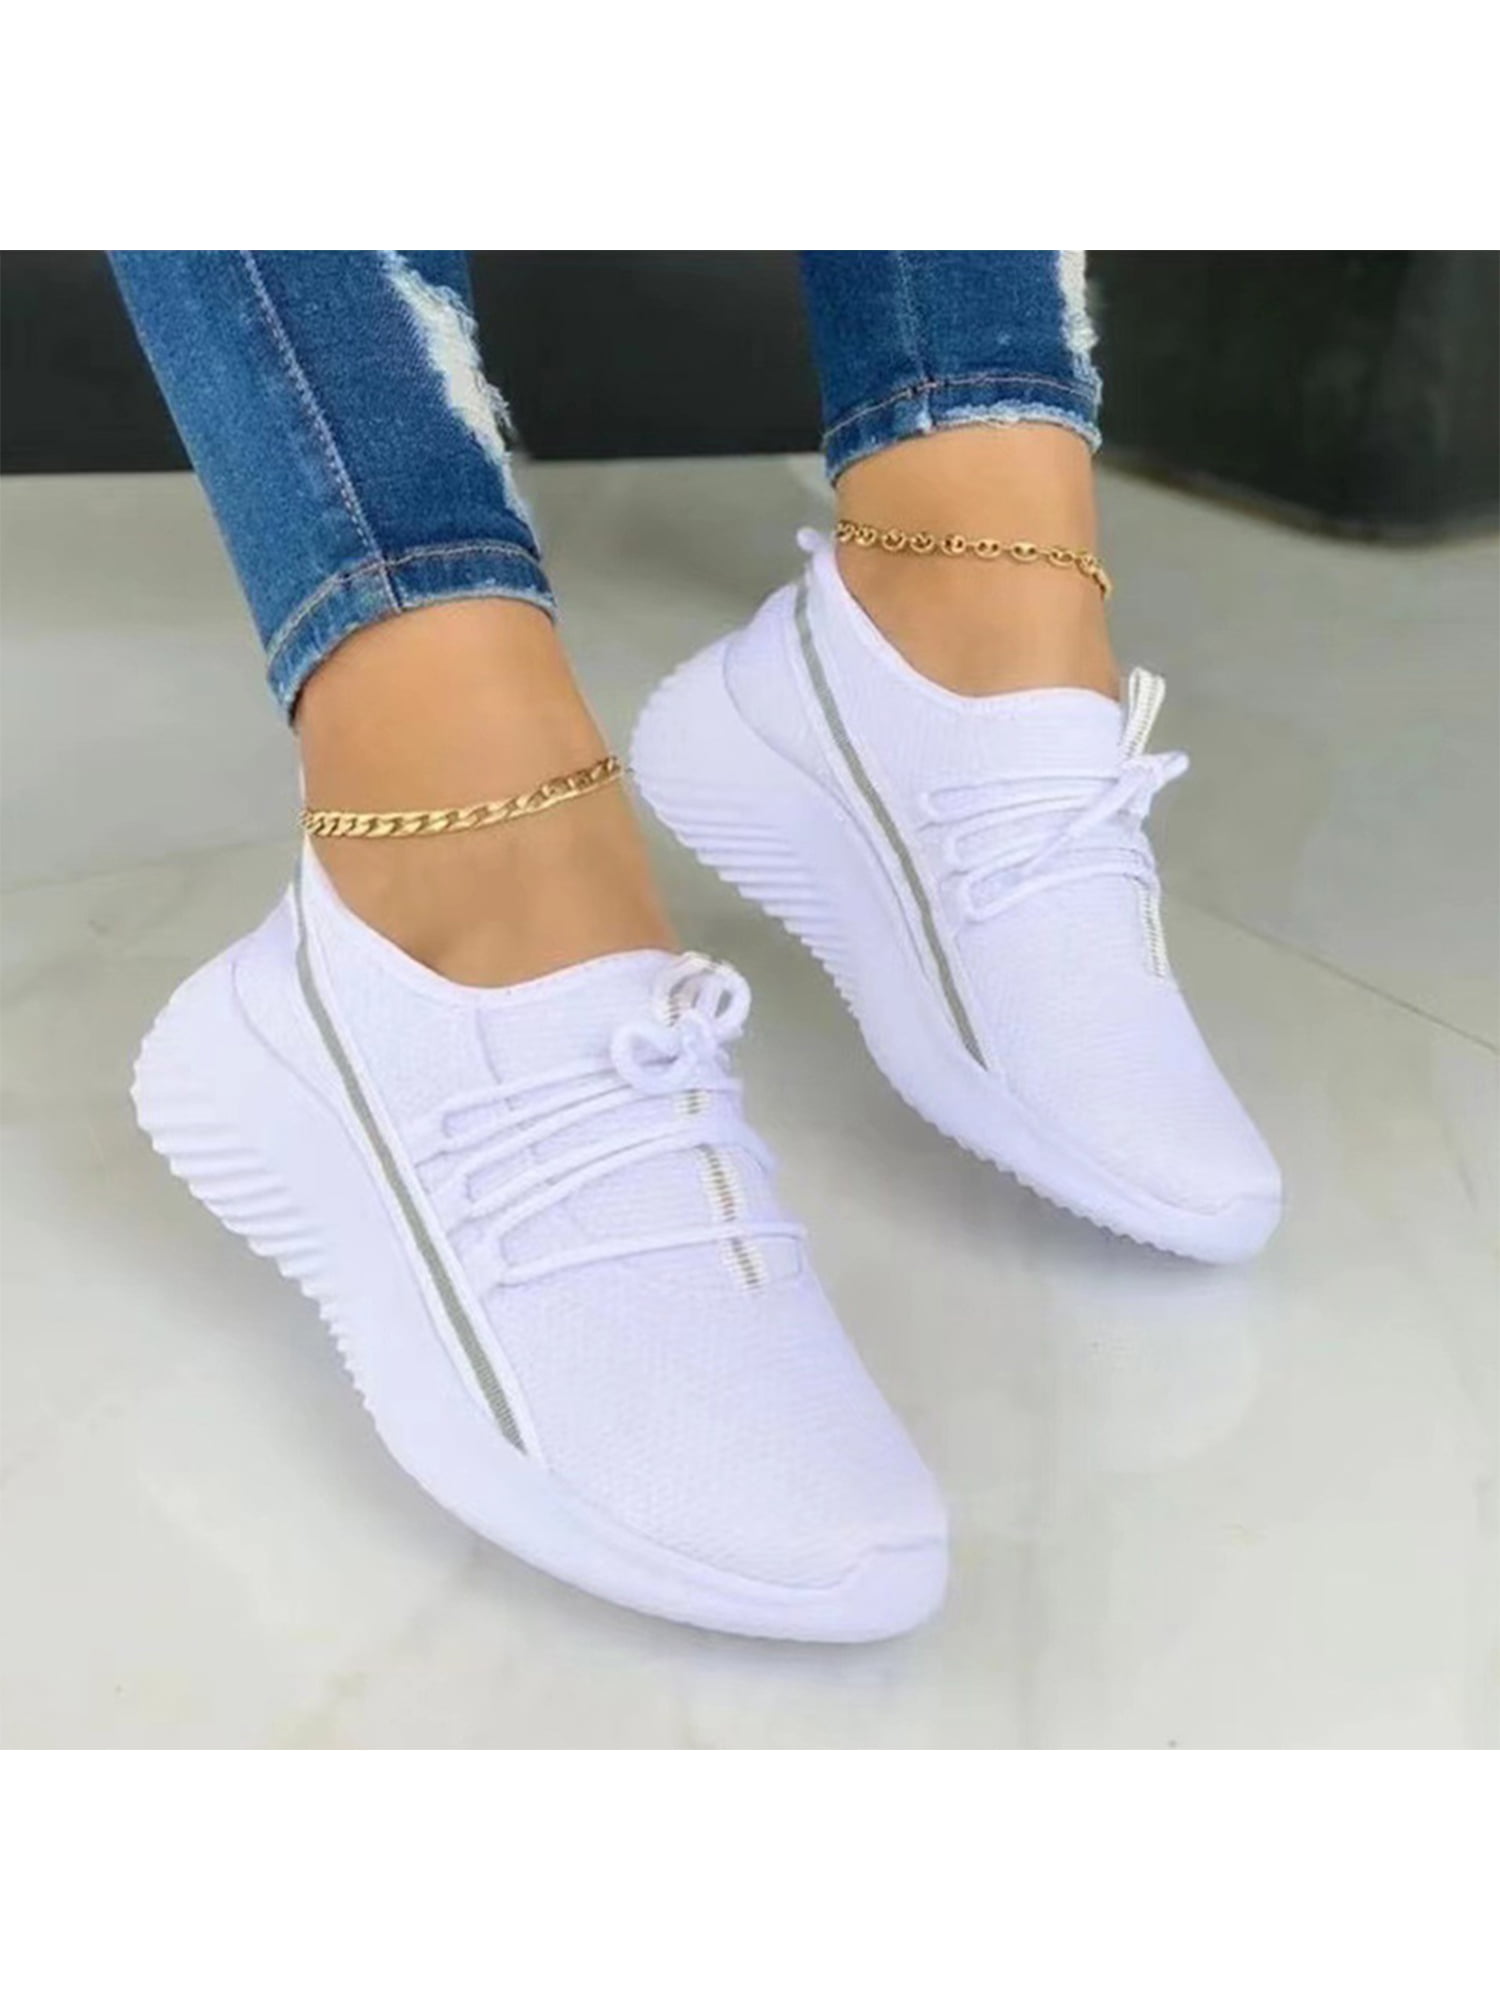 Women's Slip On Trainers Comfortable Flats Sneakers Sport Gym Pumps Casual Shoes 